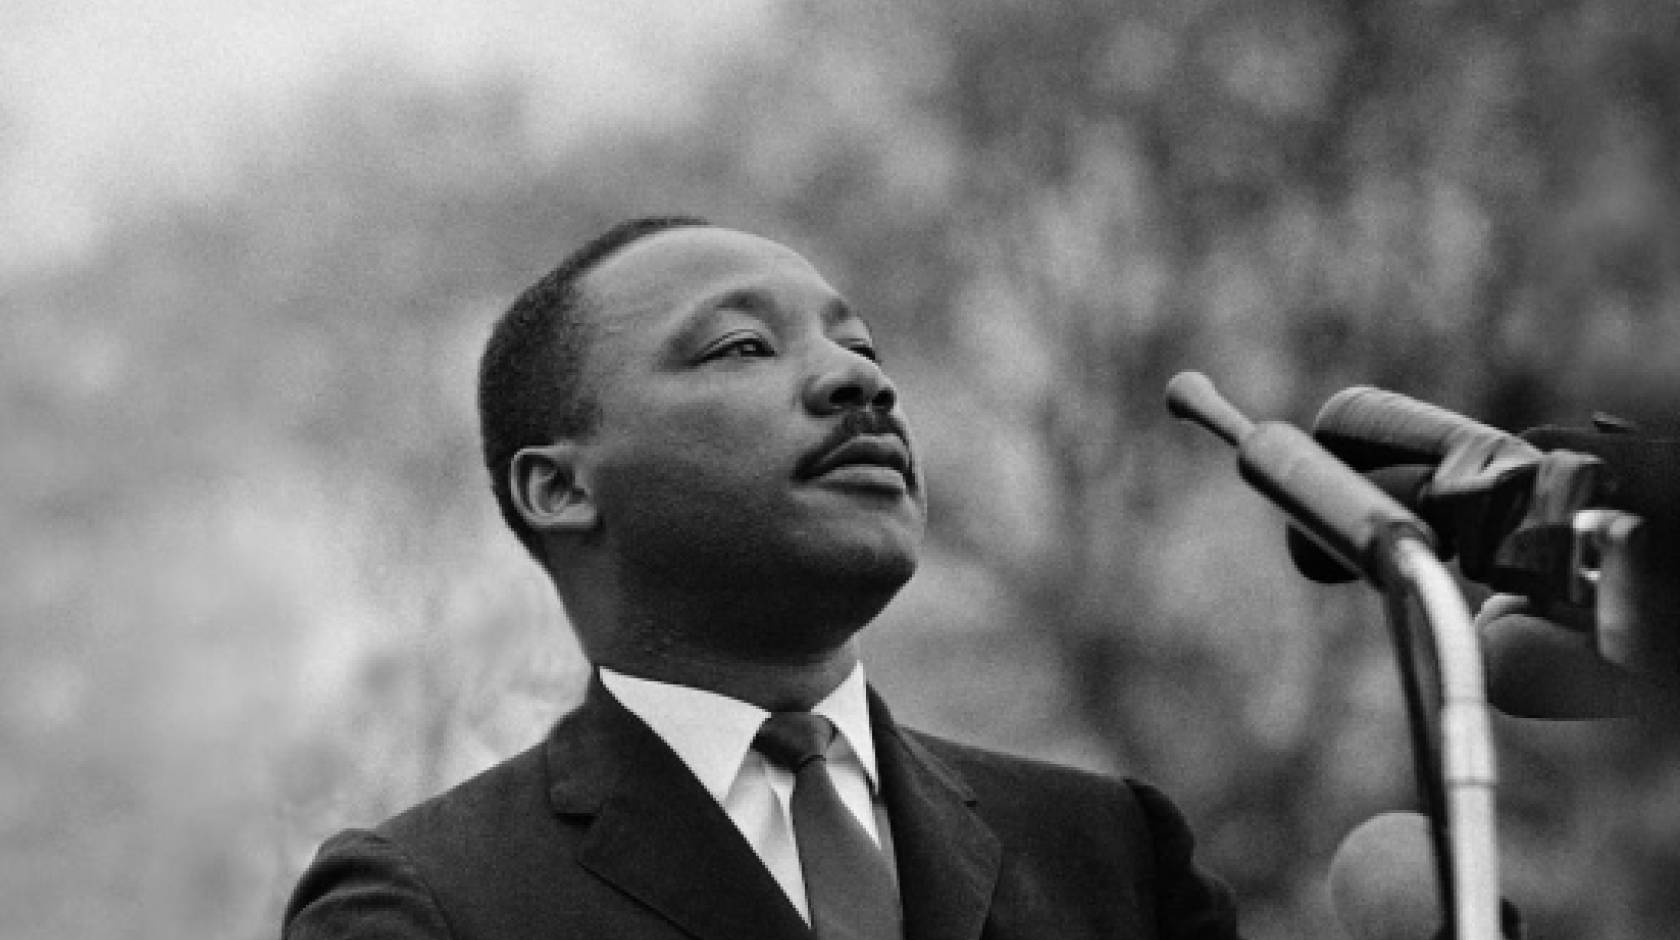 Martin Luther King Jr. at a microphone